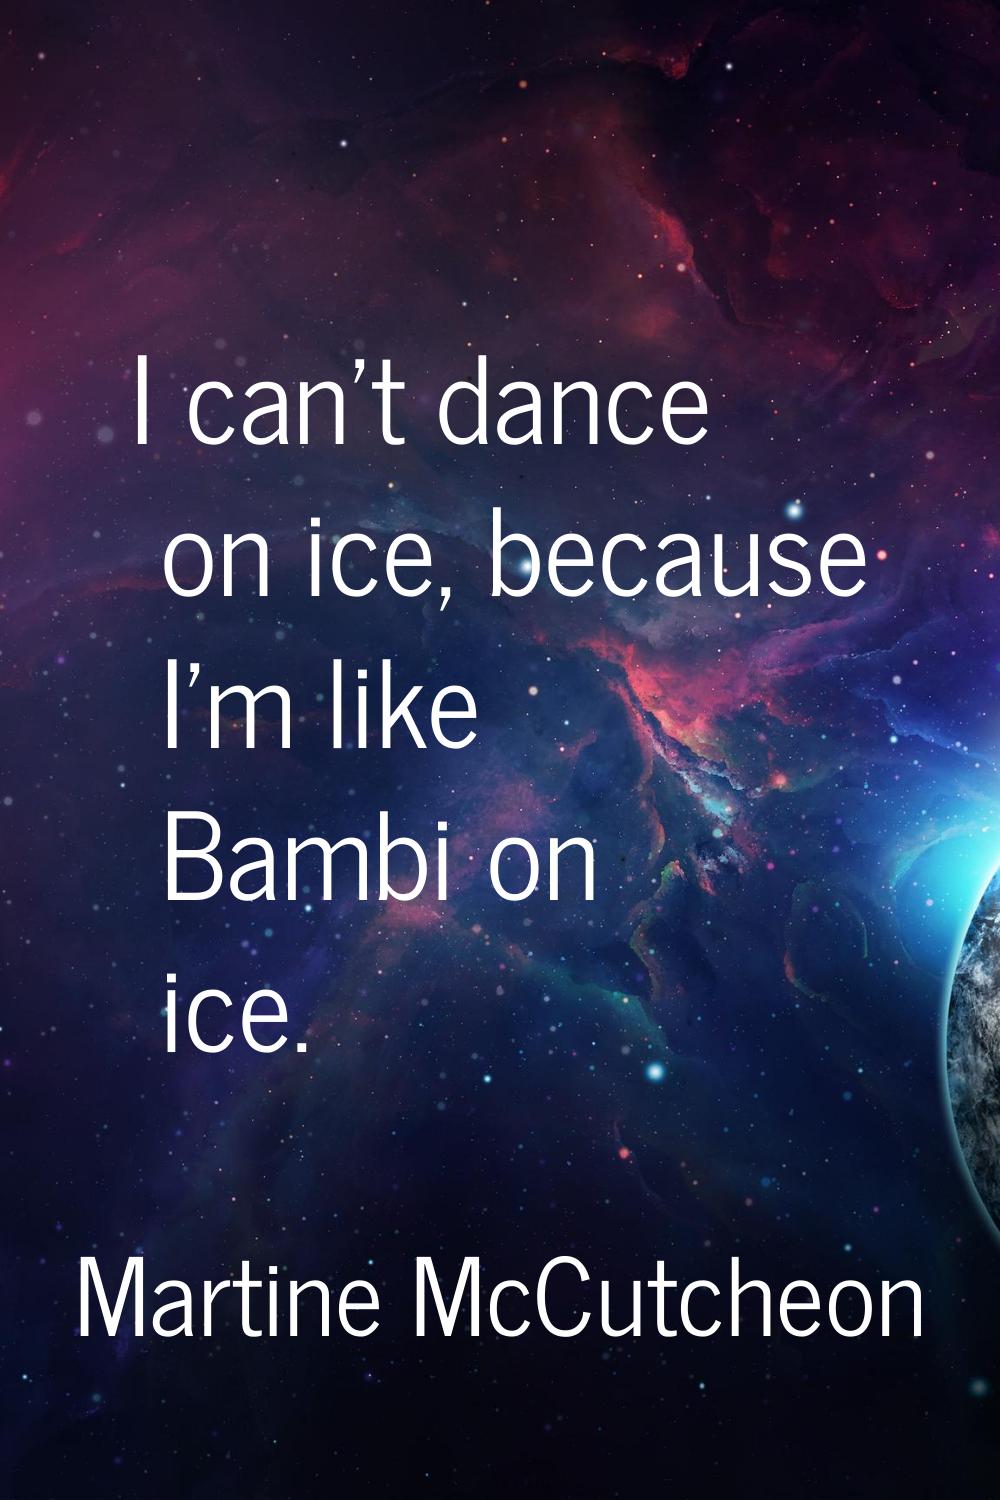 I can't dance on ice, because I'm like Bambi on ice.